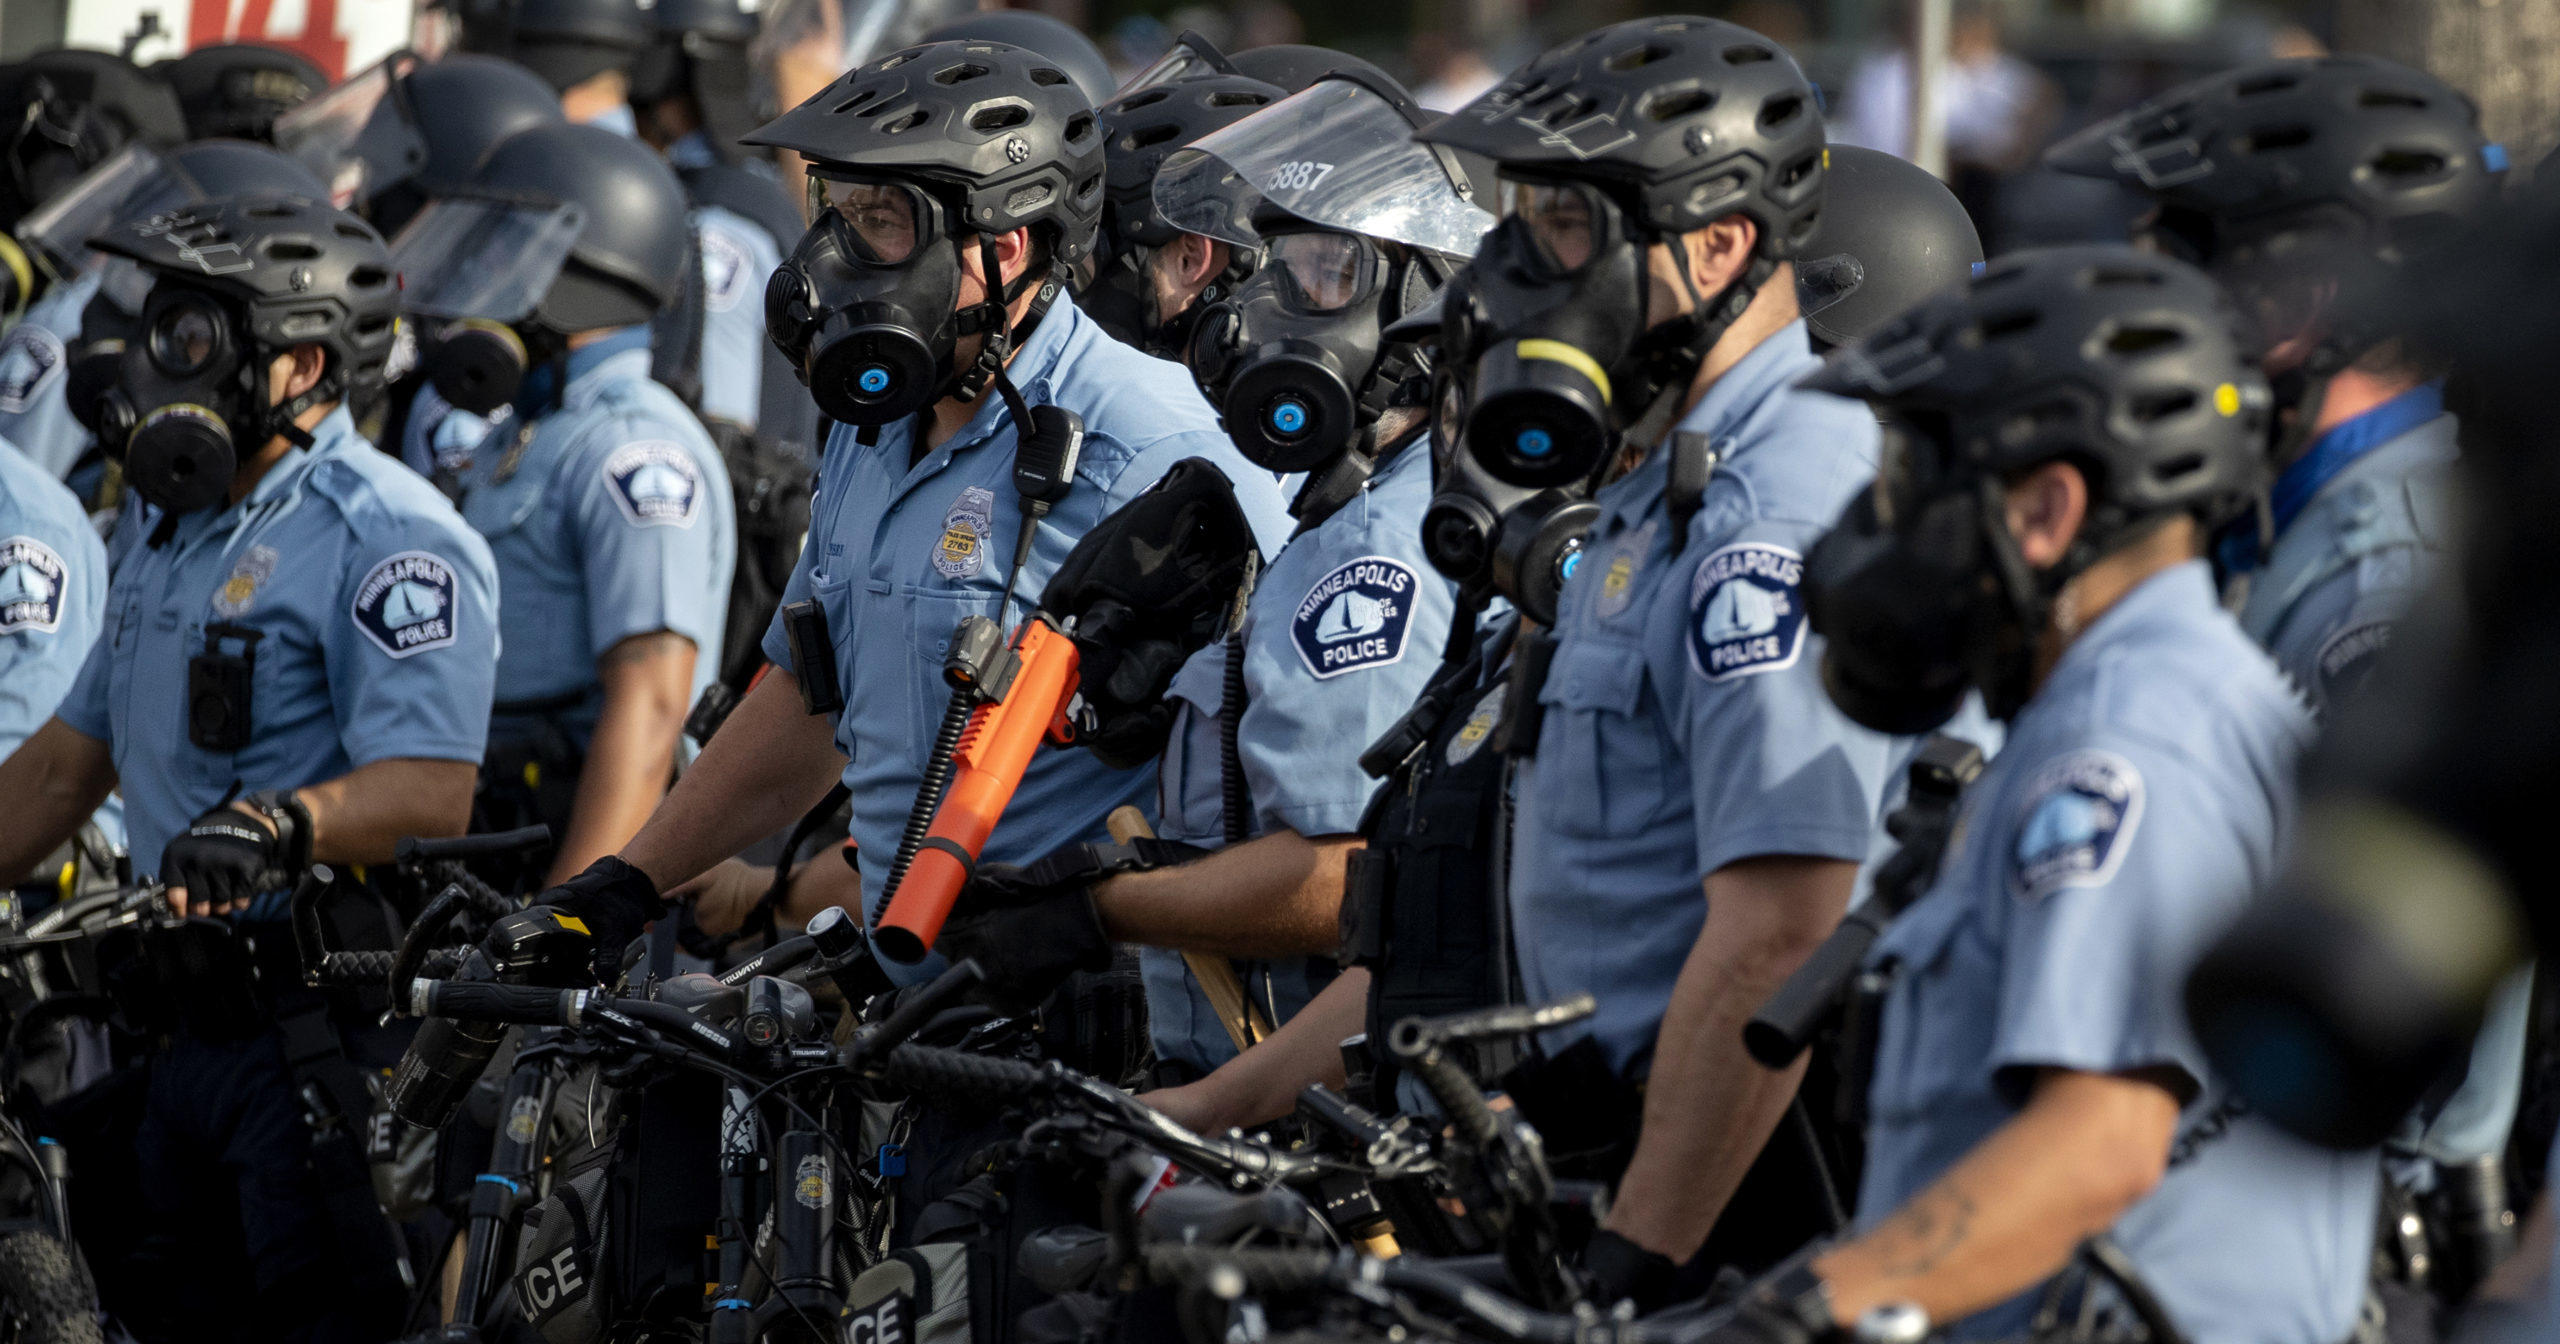 In this May 27, 2020, file photo, police gather as protests continue at the Minneapolis 3rd Police Precinct in Minneapolis. More than 150 Minneapolis police officers have started the process of filing for disability claims since the death of George Floyd and the ensuing unrest in the city, with the majority citing post-traumatic stress disorder as the reason for their planned departure, according to an attorney representing the officers.